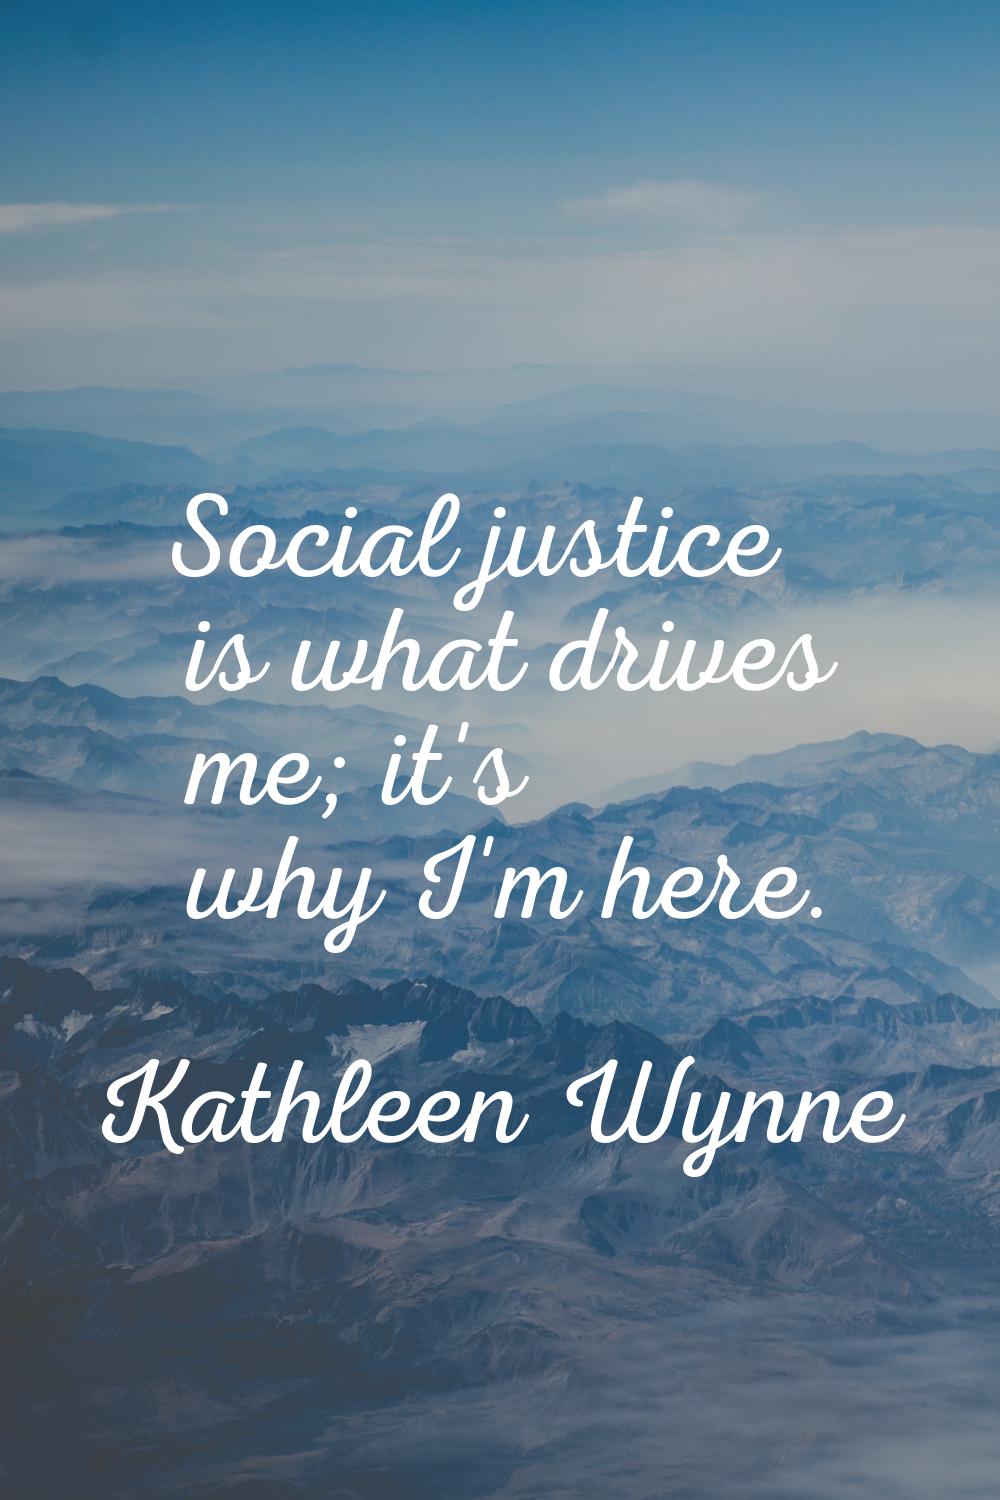 Social justice is what drives me; it's why I'm here.